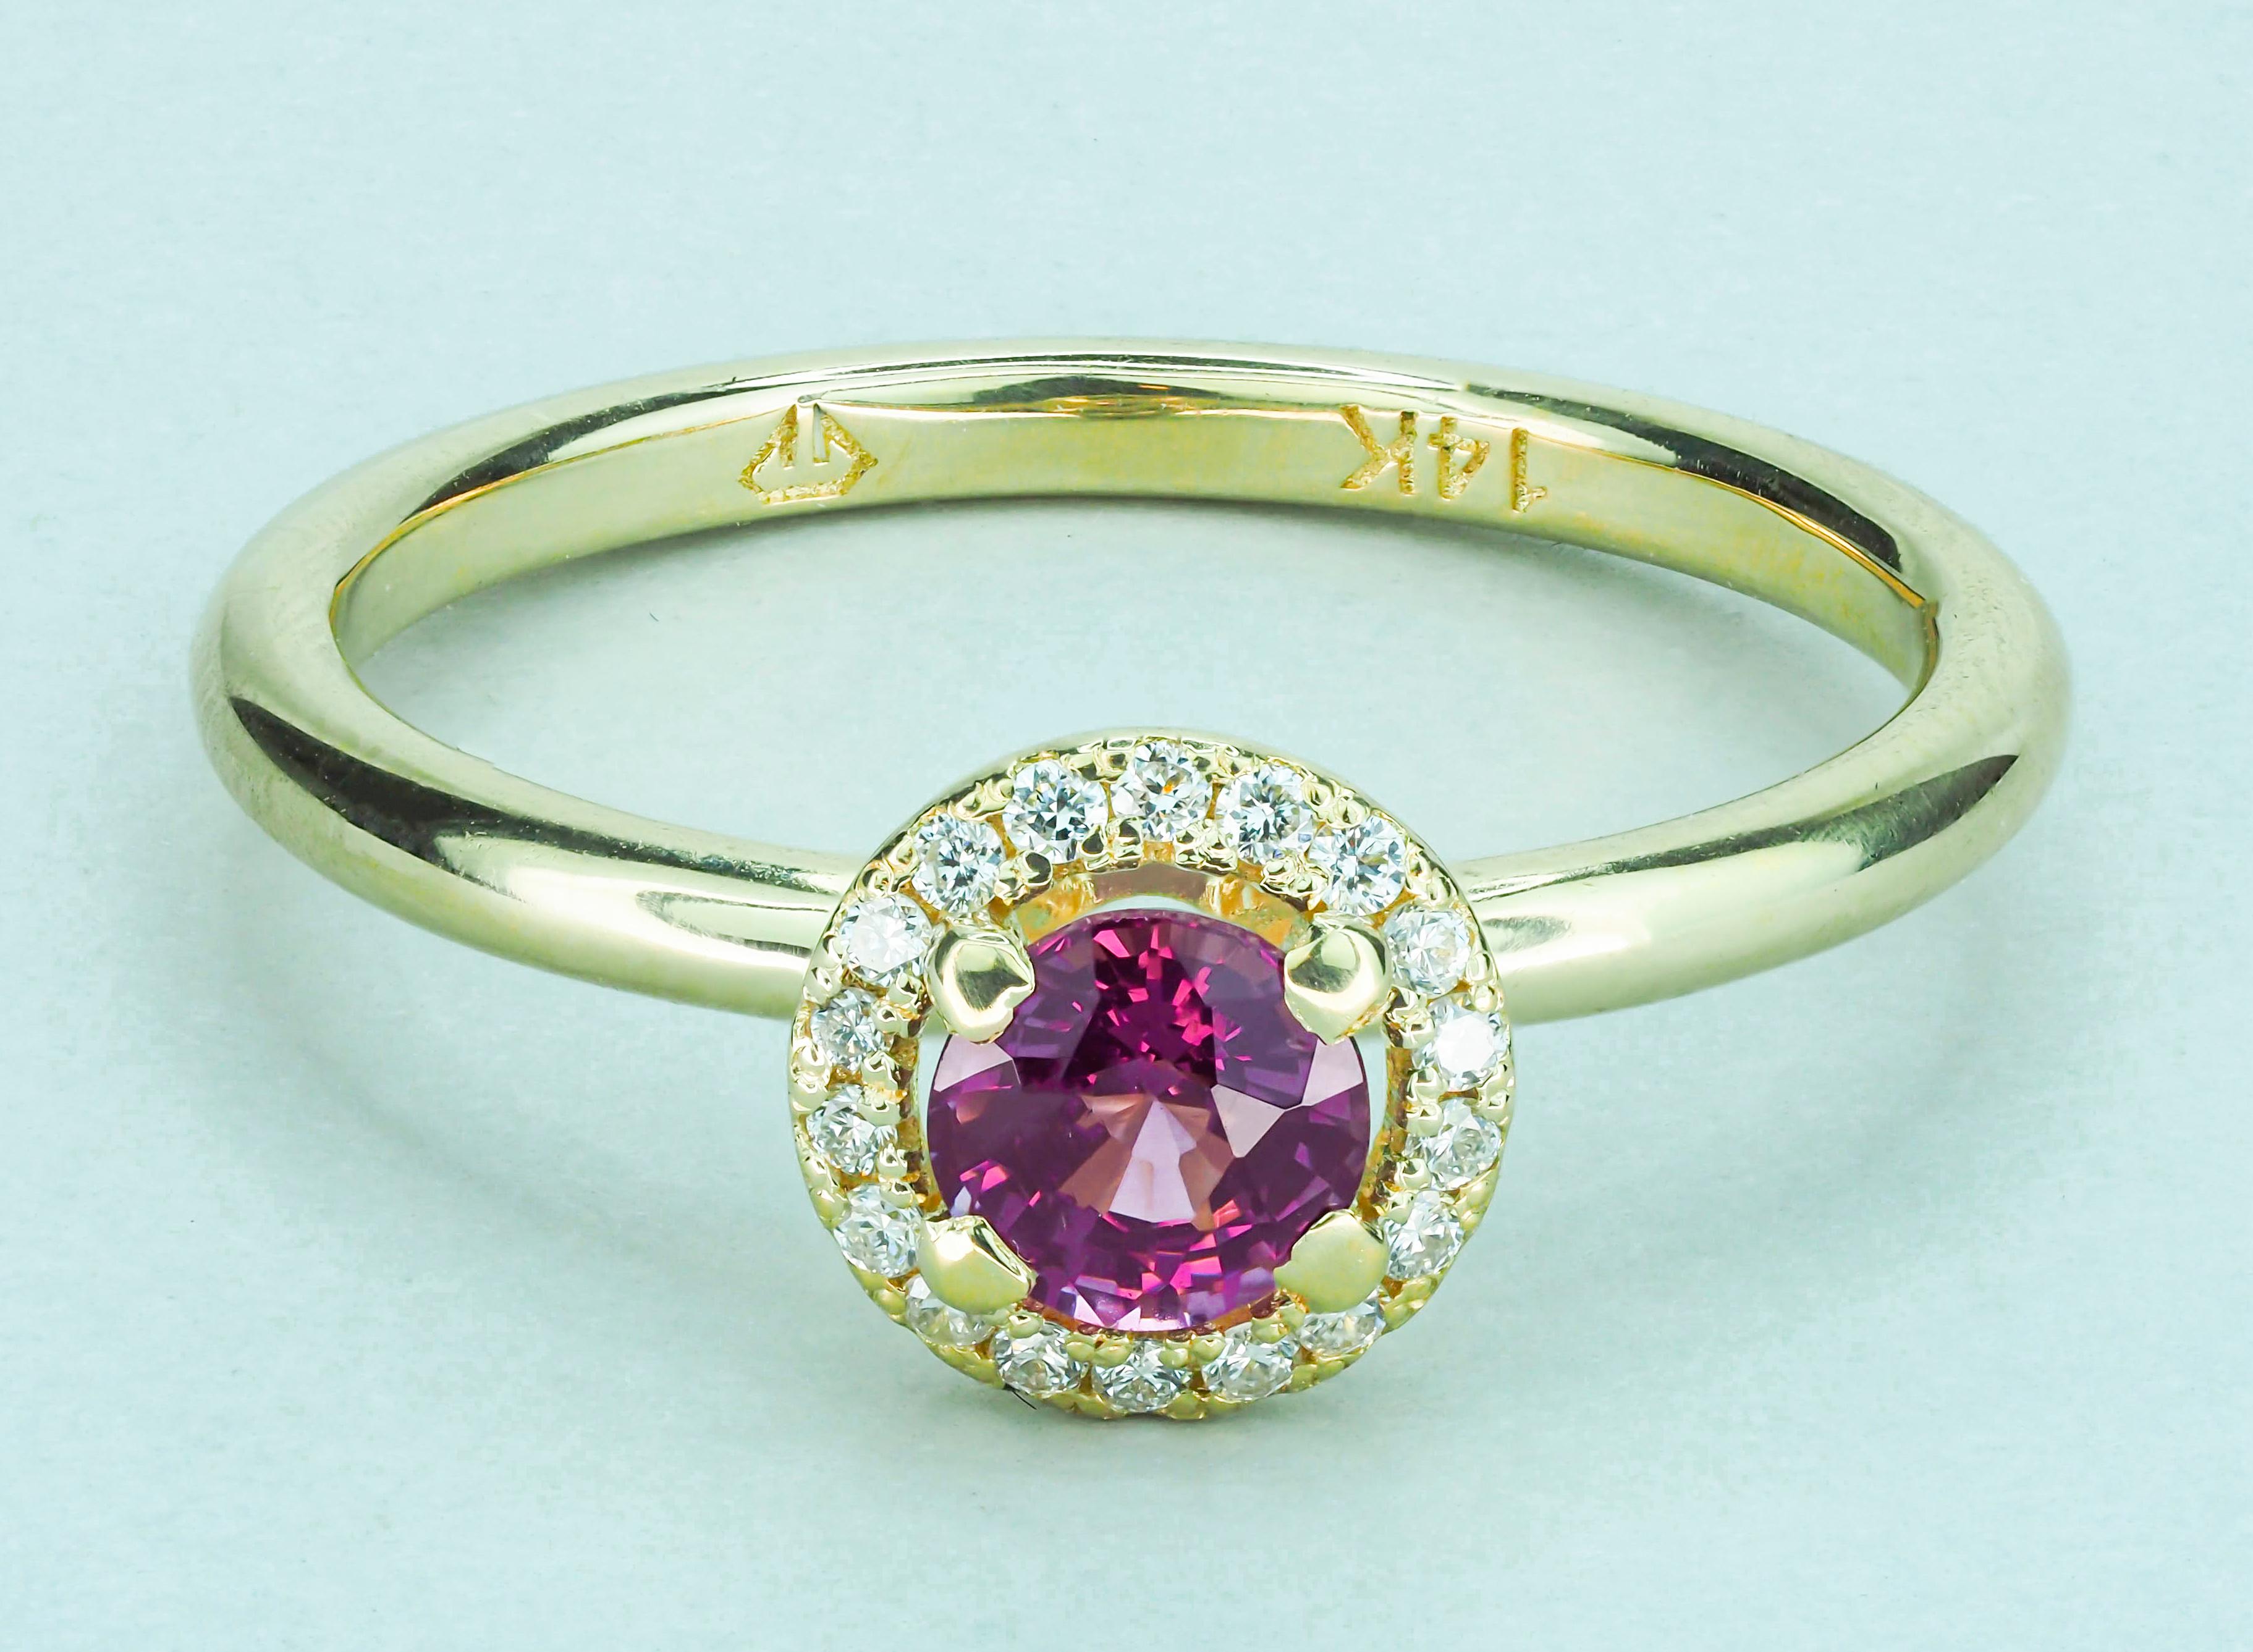 For Sale:  14k Solid Gold Ring with Natural Spinel and Diamonds 5